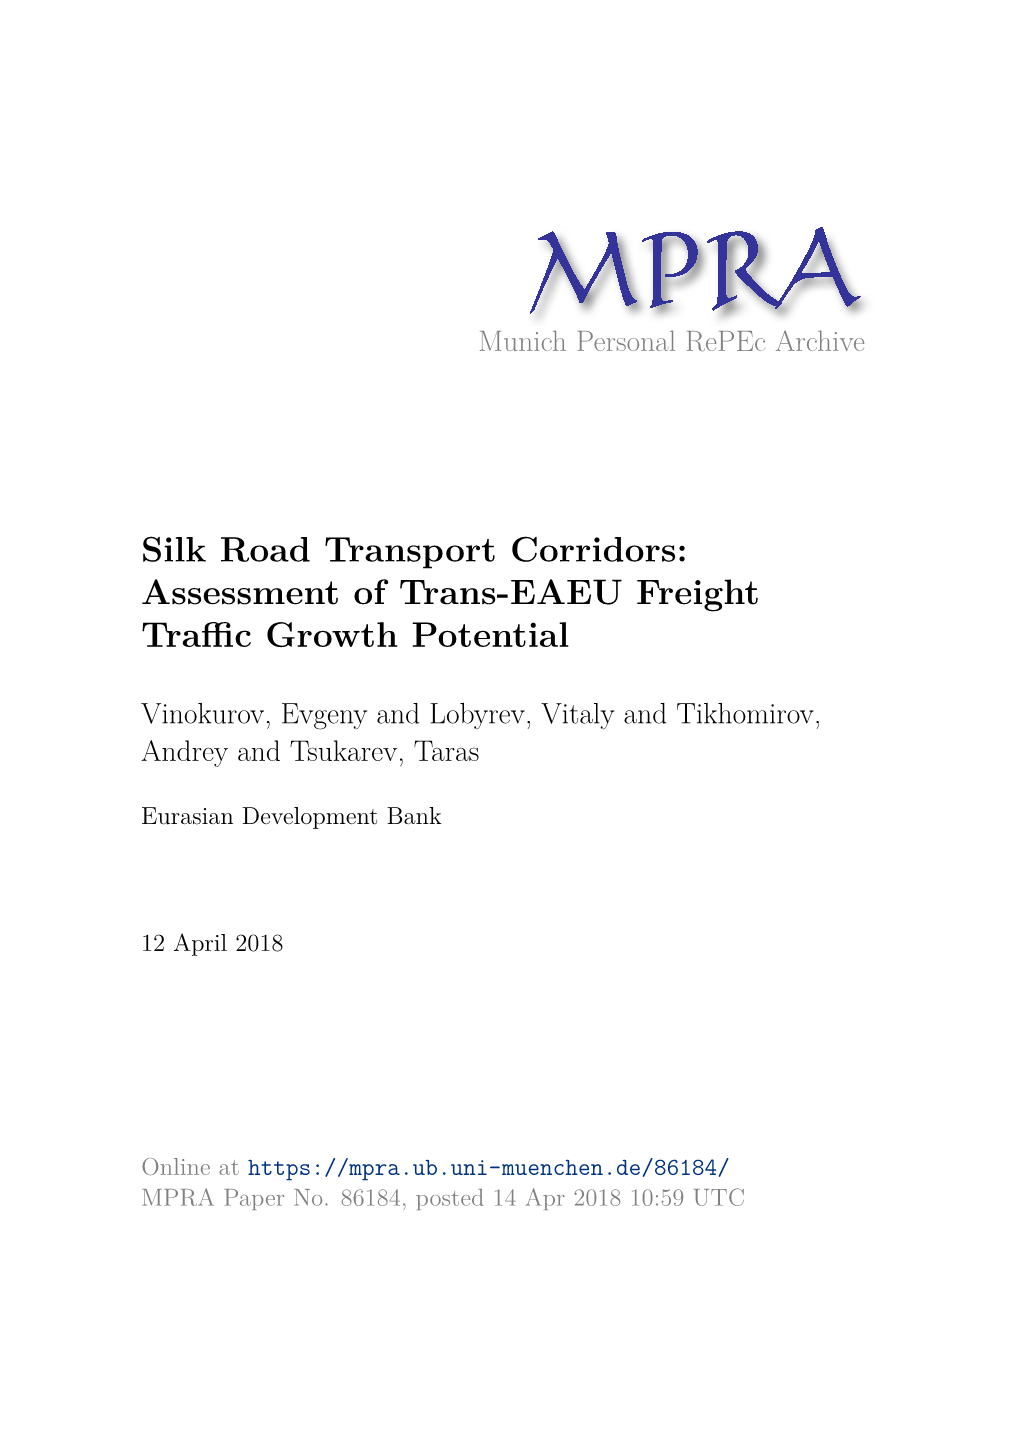 Assessment of Trans-EAEU Freight Traffic Growth Potential